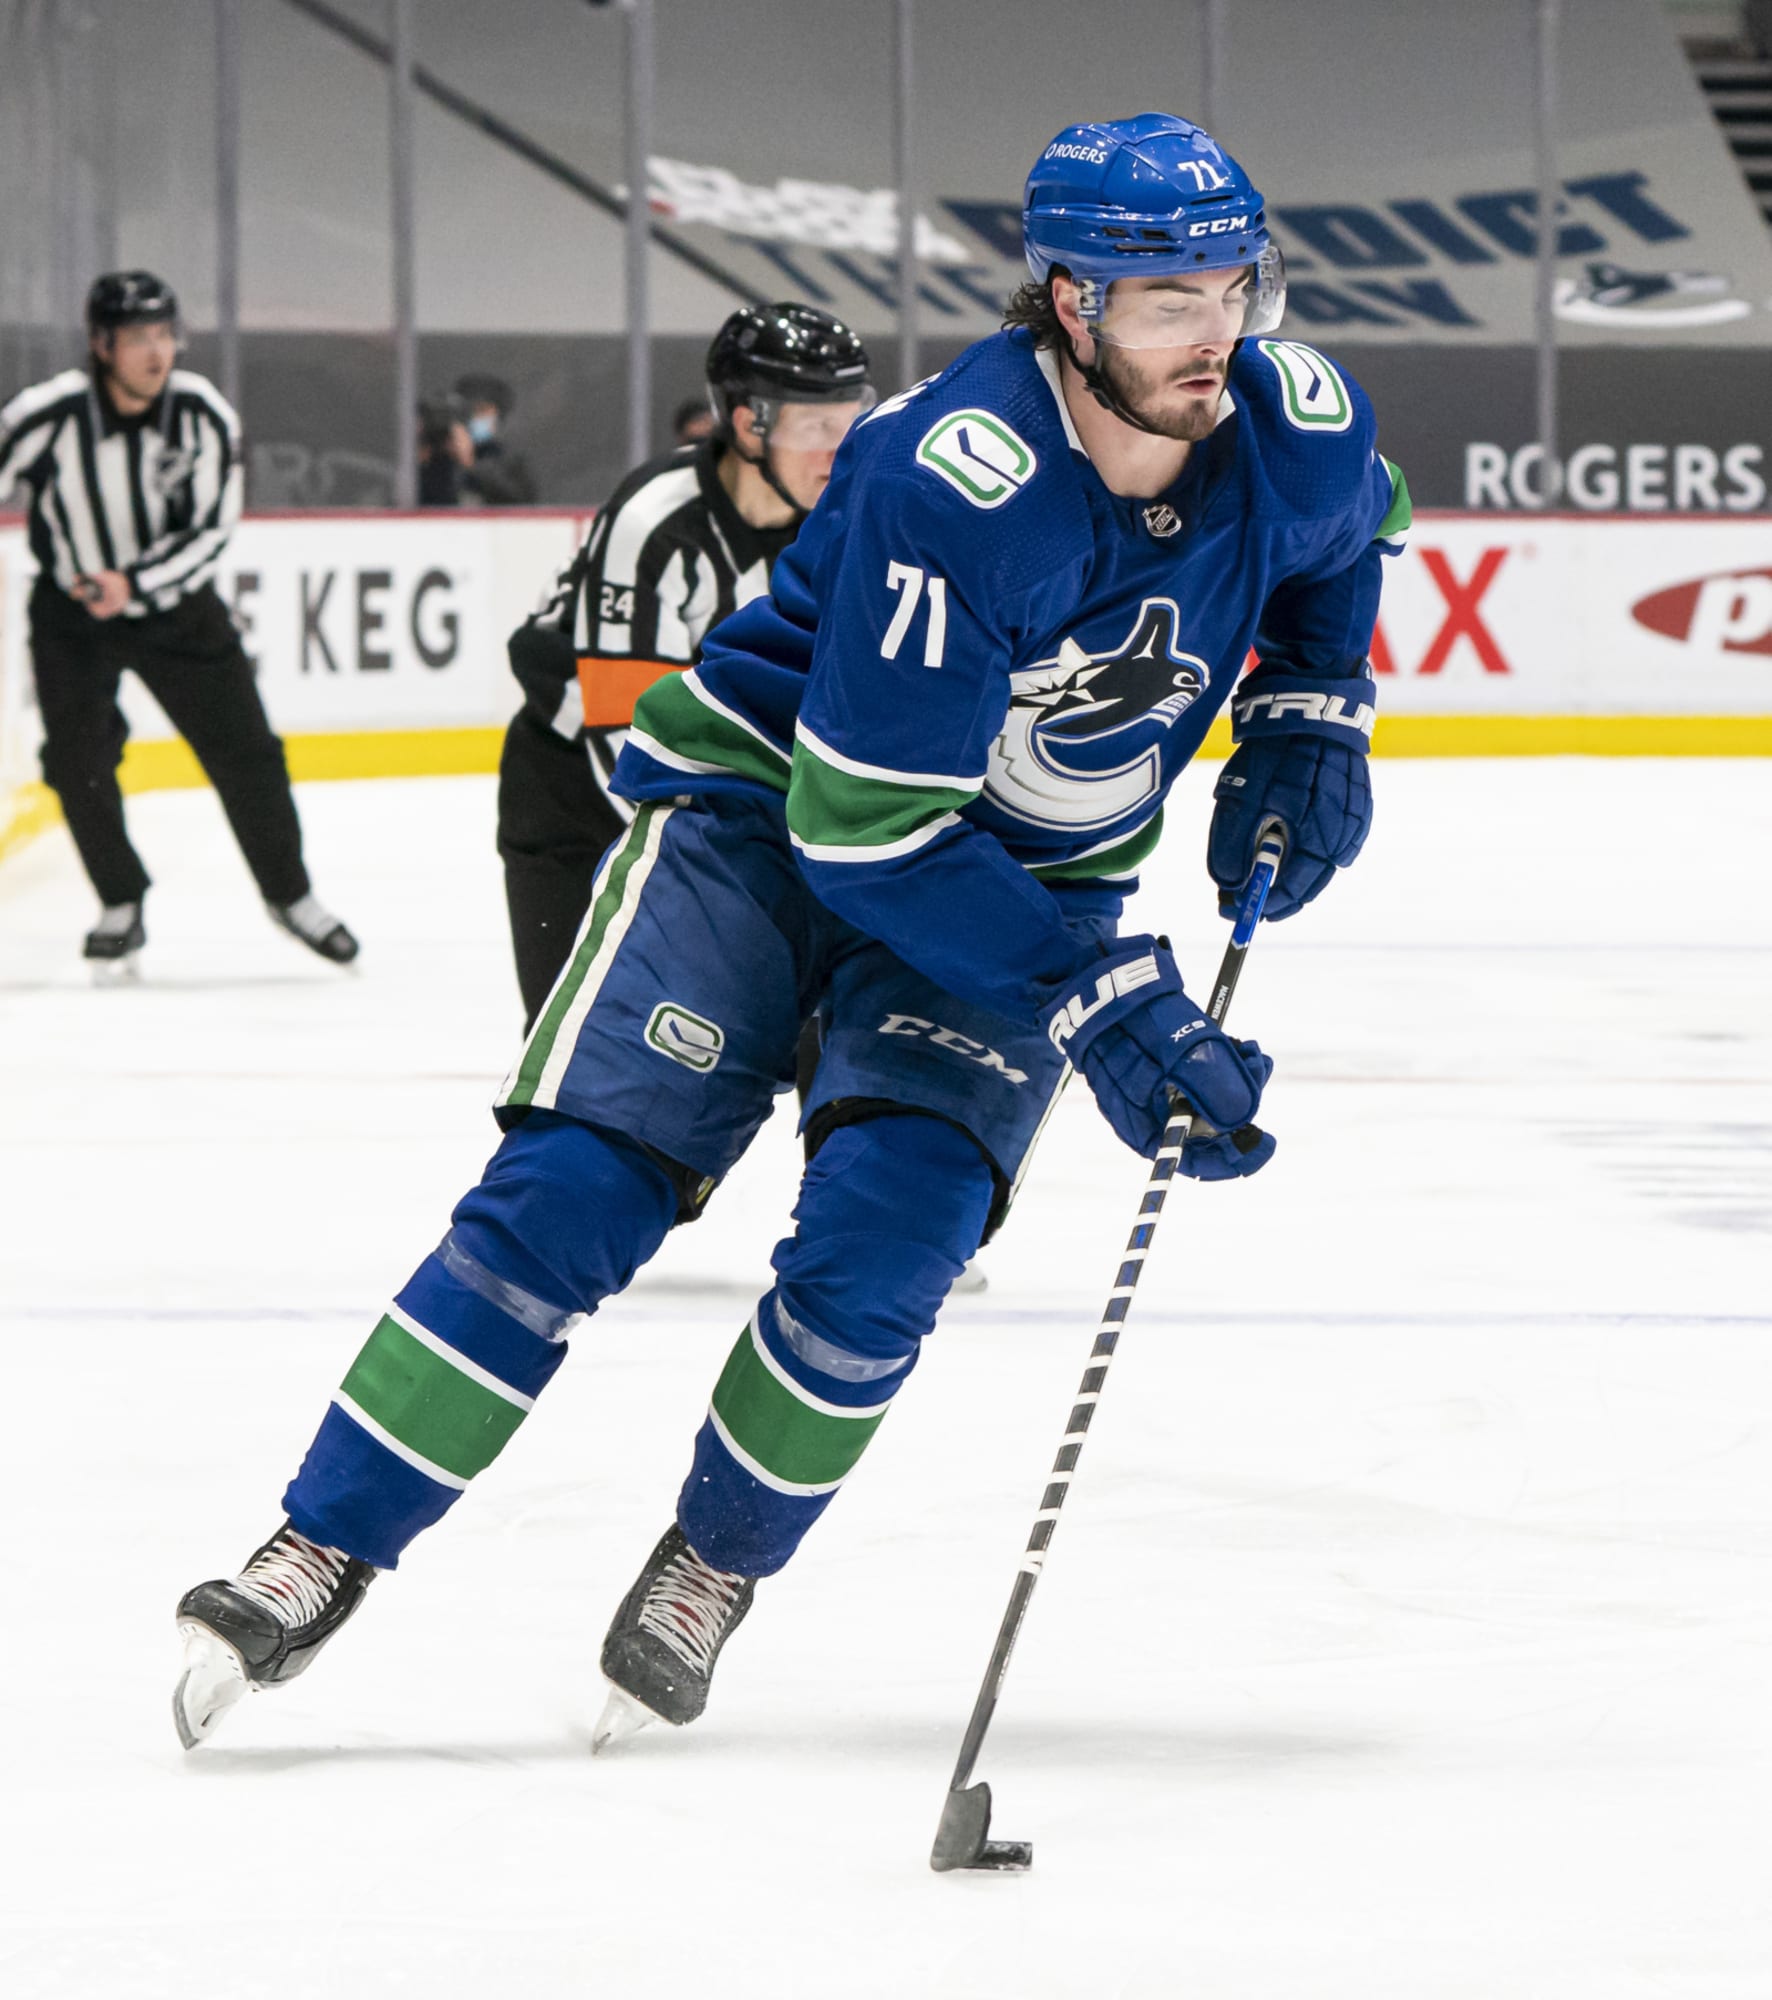 Canucks' Zack MacEwen on why he's never letting go of No. 71